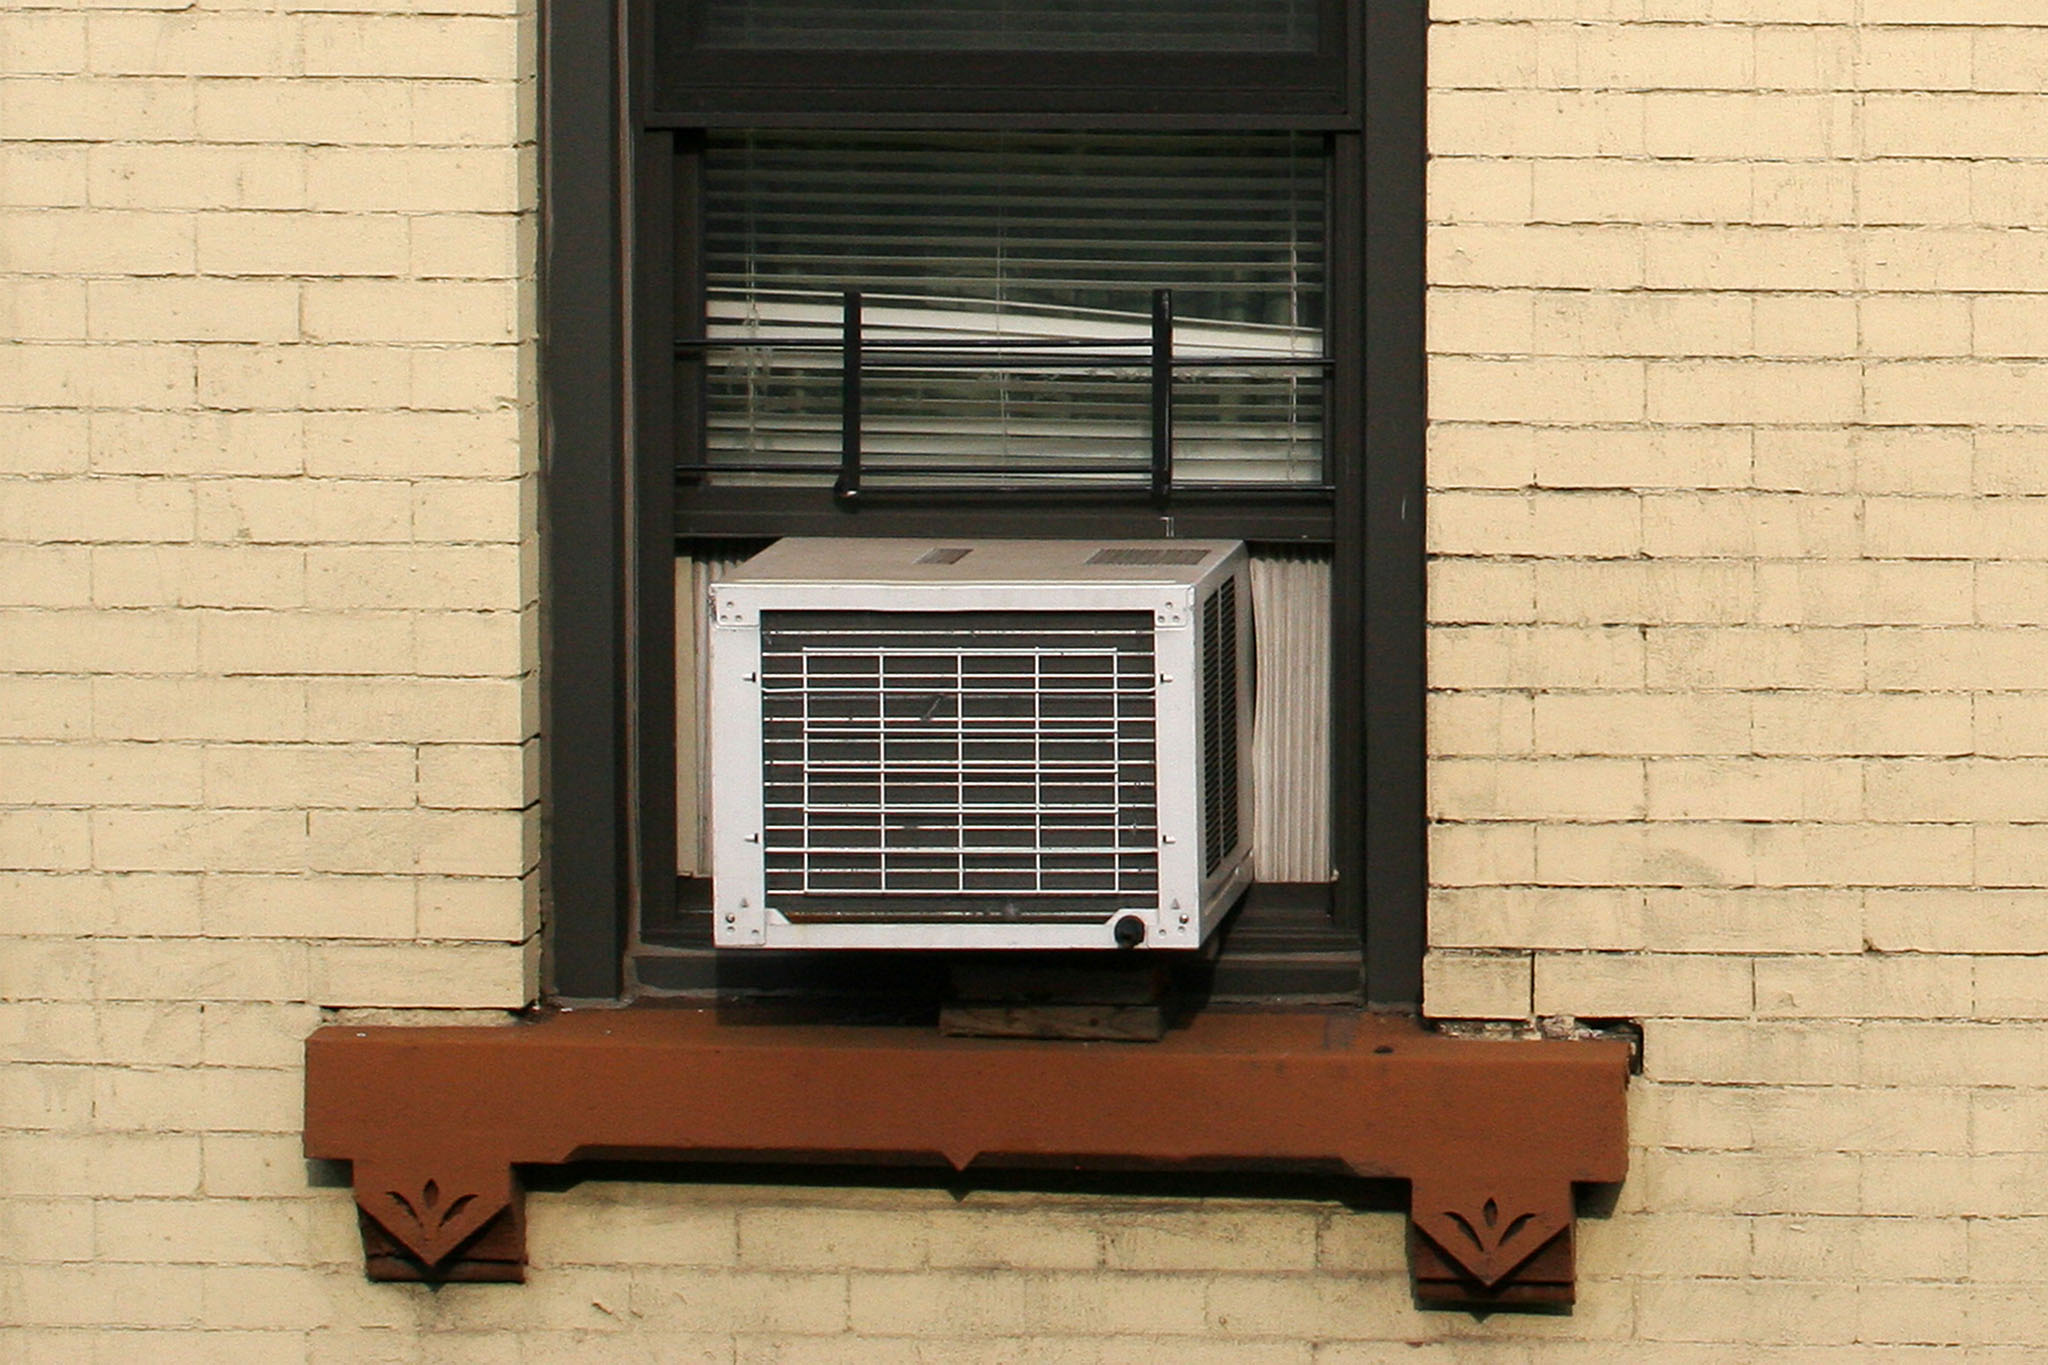 The best window air conditioners, according to experts